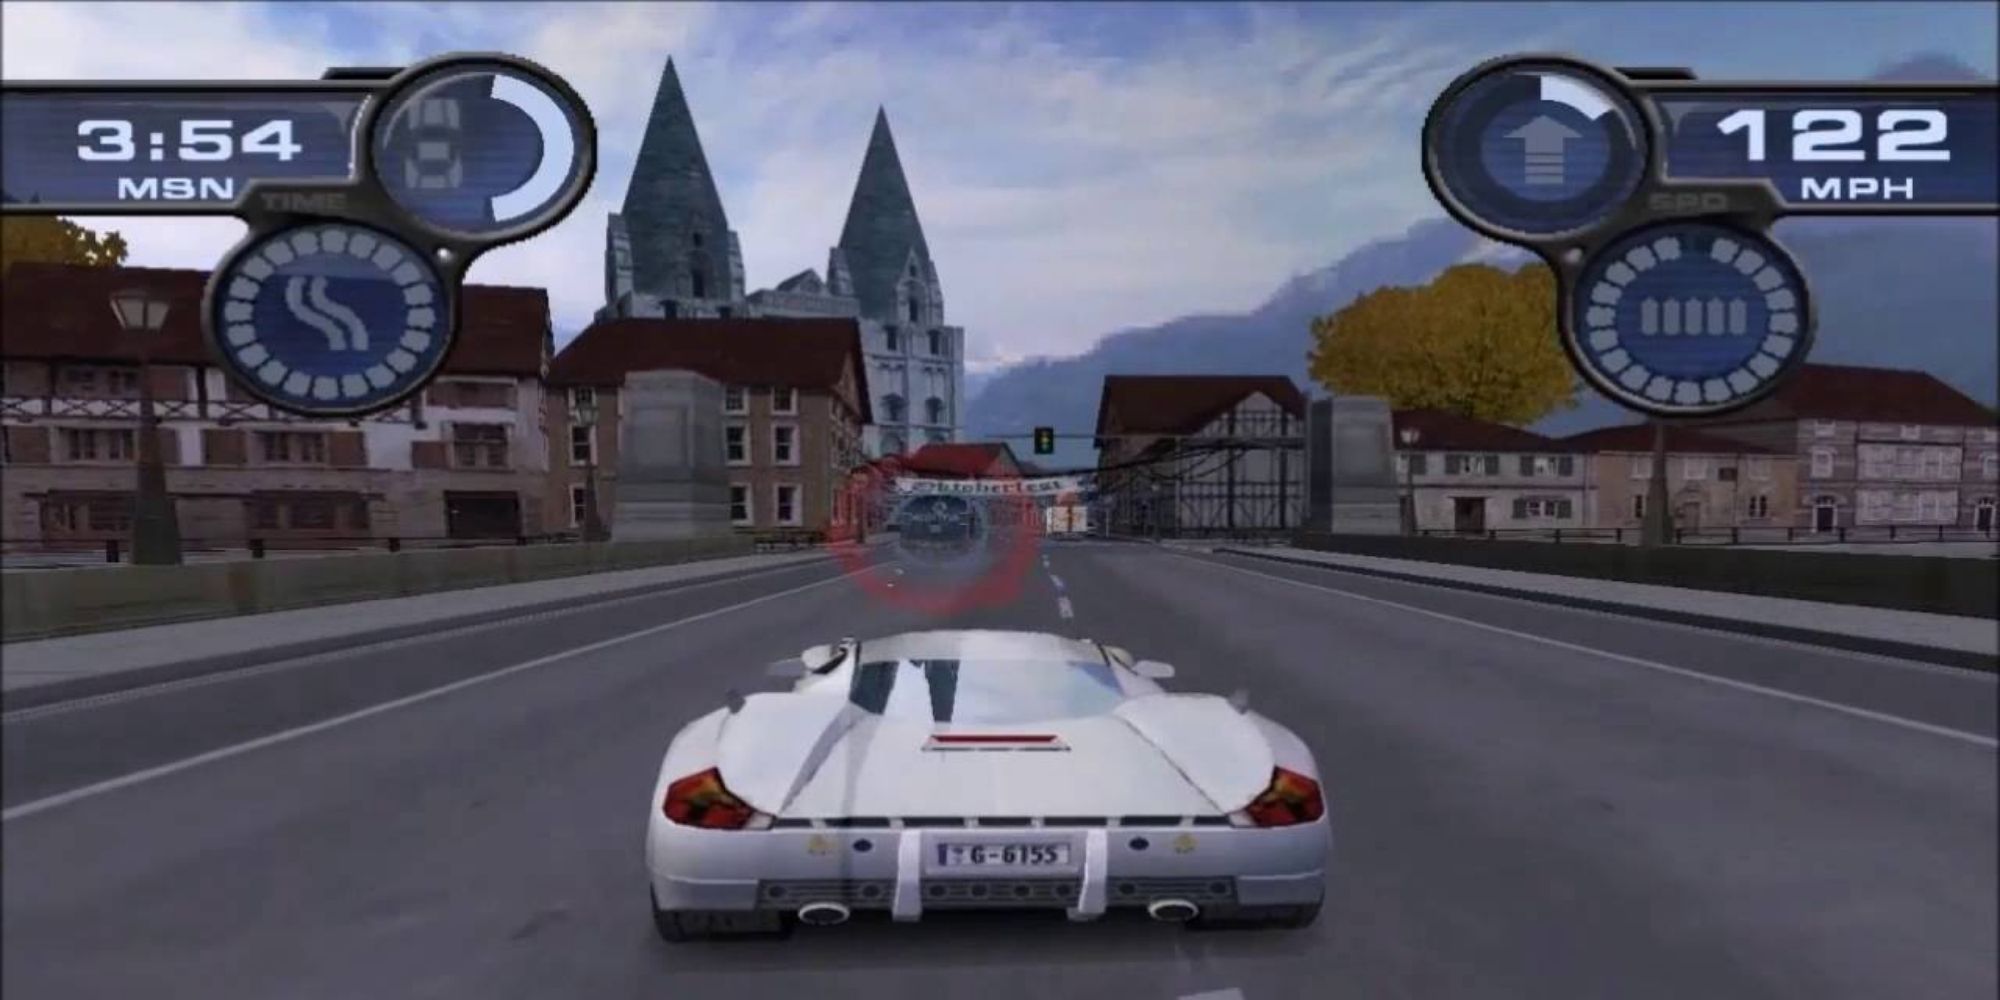 SpyHunter Interceptor from 2001 PS2 game on streets of germany